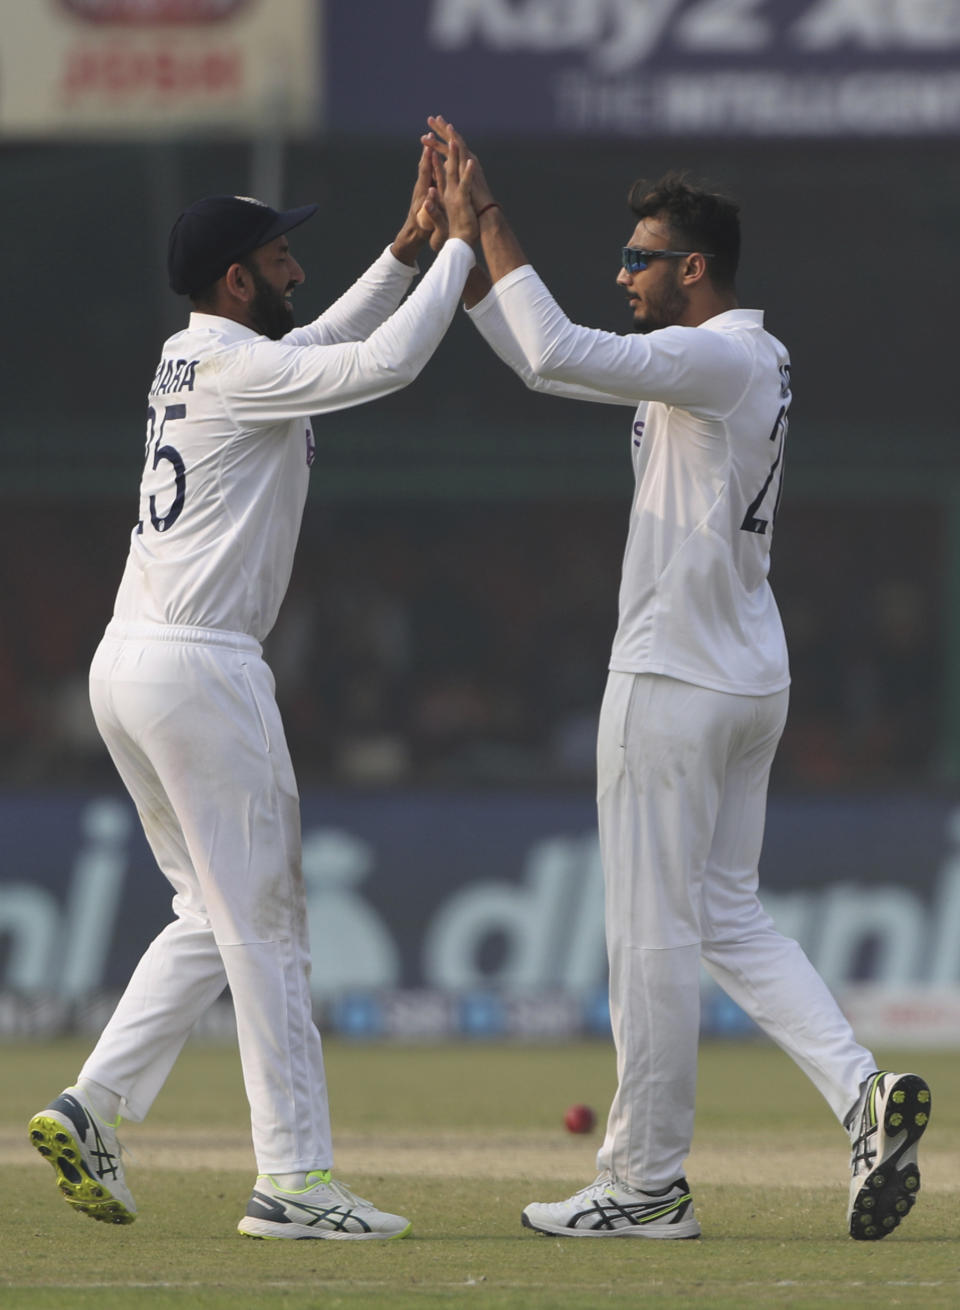 India's bowler Axar Patel, right, celebrates the dismissal of New Zealand's Tim Southee with his teammate Cheteshwar Pujara during the day three of their first test cricket match in Kanpur, India, Saturday, Nov. 27, 2021. (AP Photo/Altaf Qadri)